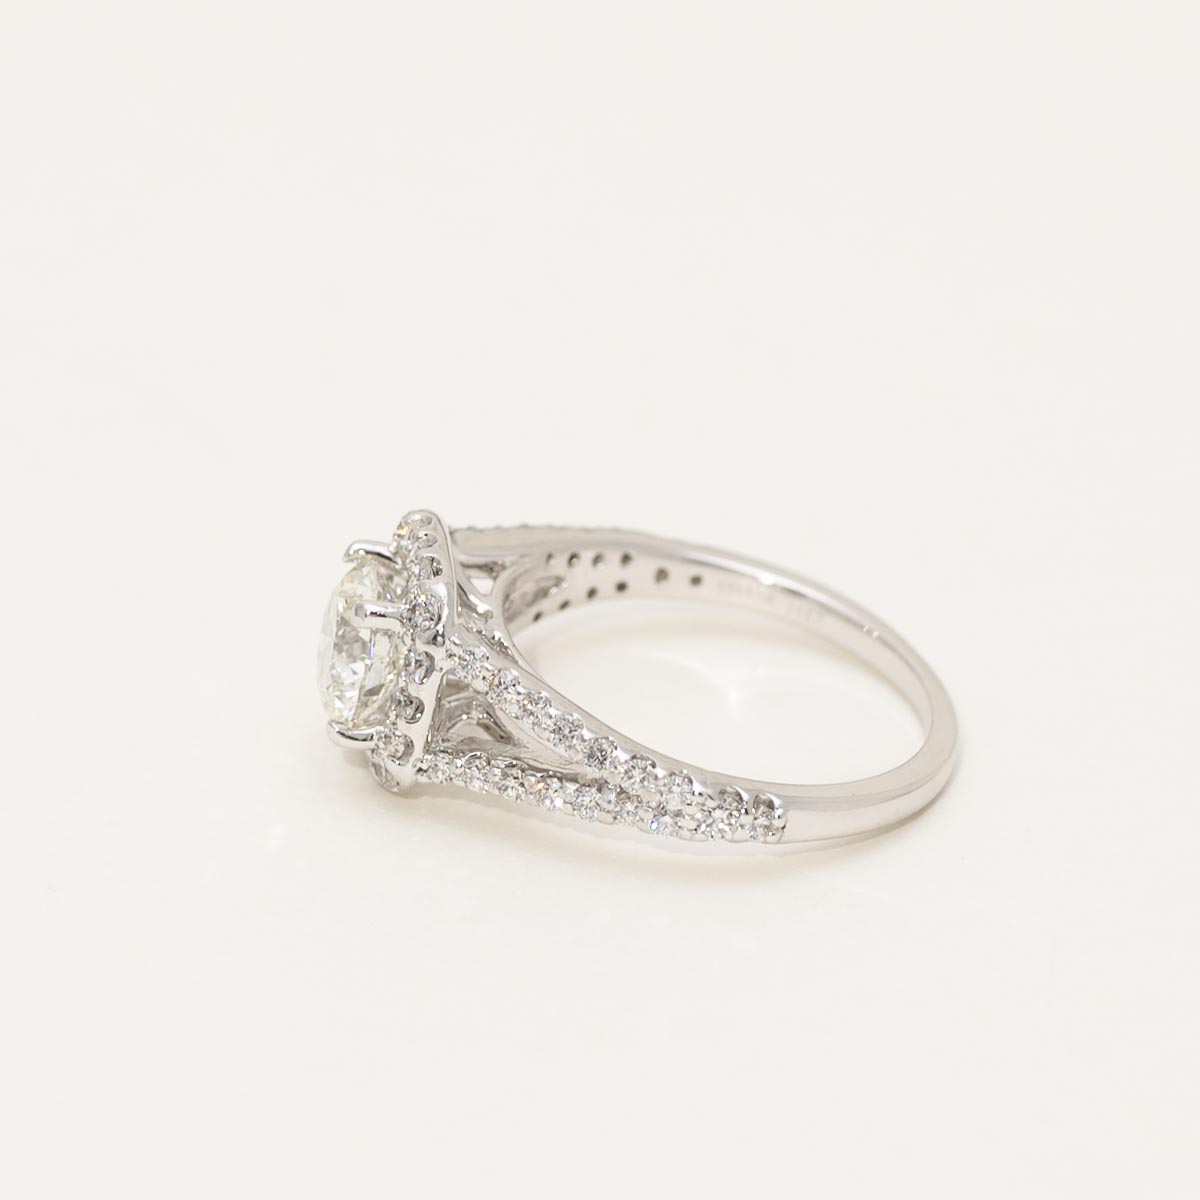 Estate Diamond Halo Engagement Ring in 14kt White Gold (1 1/2ct tw)